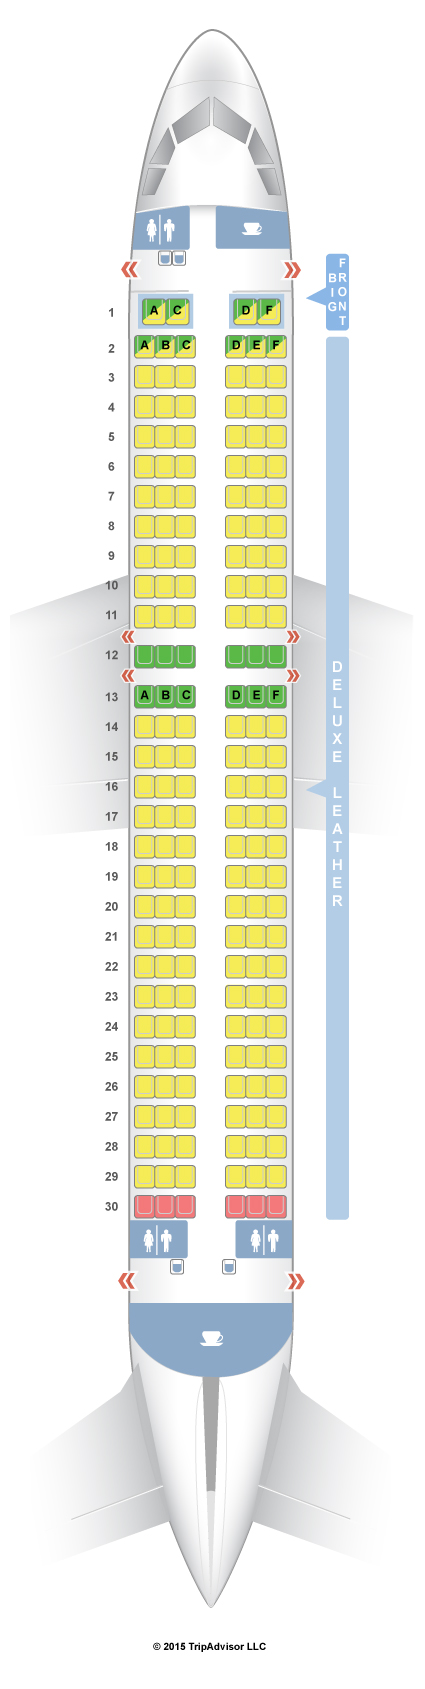 If You Please Seating Chart